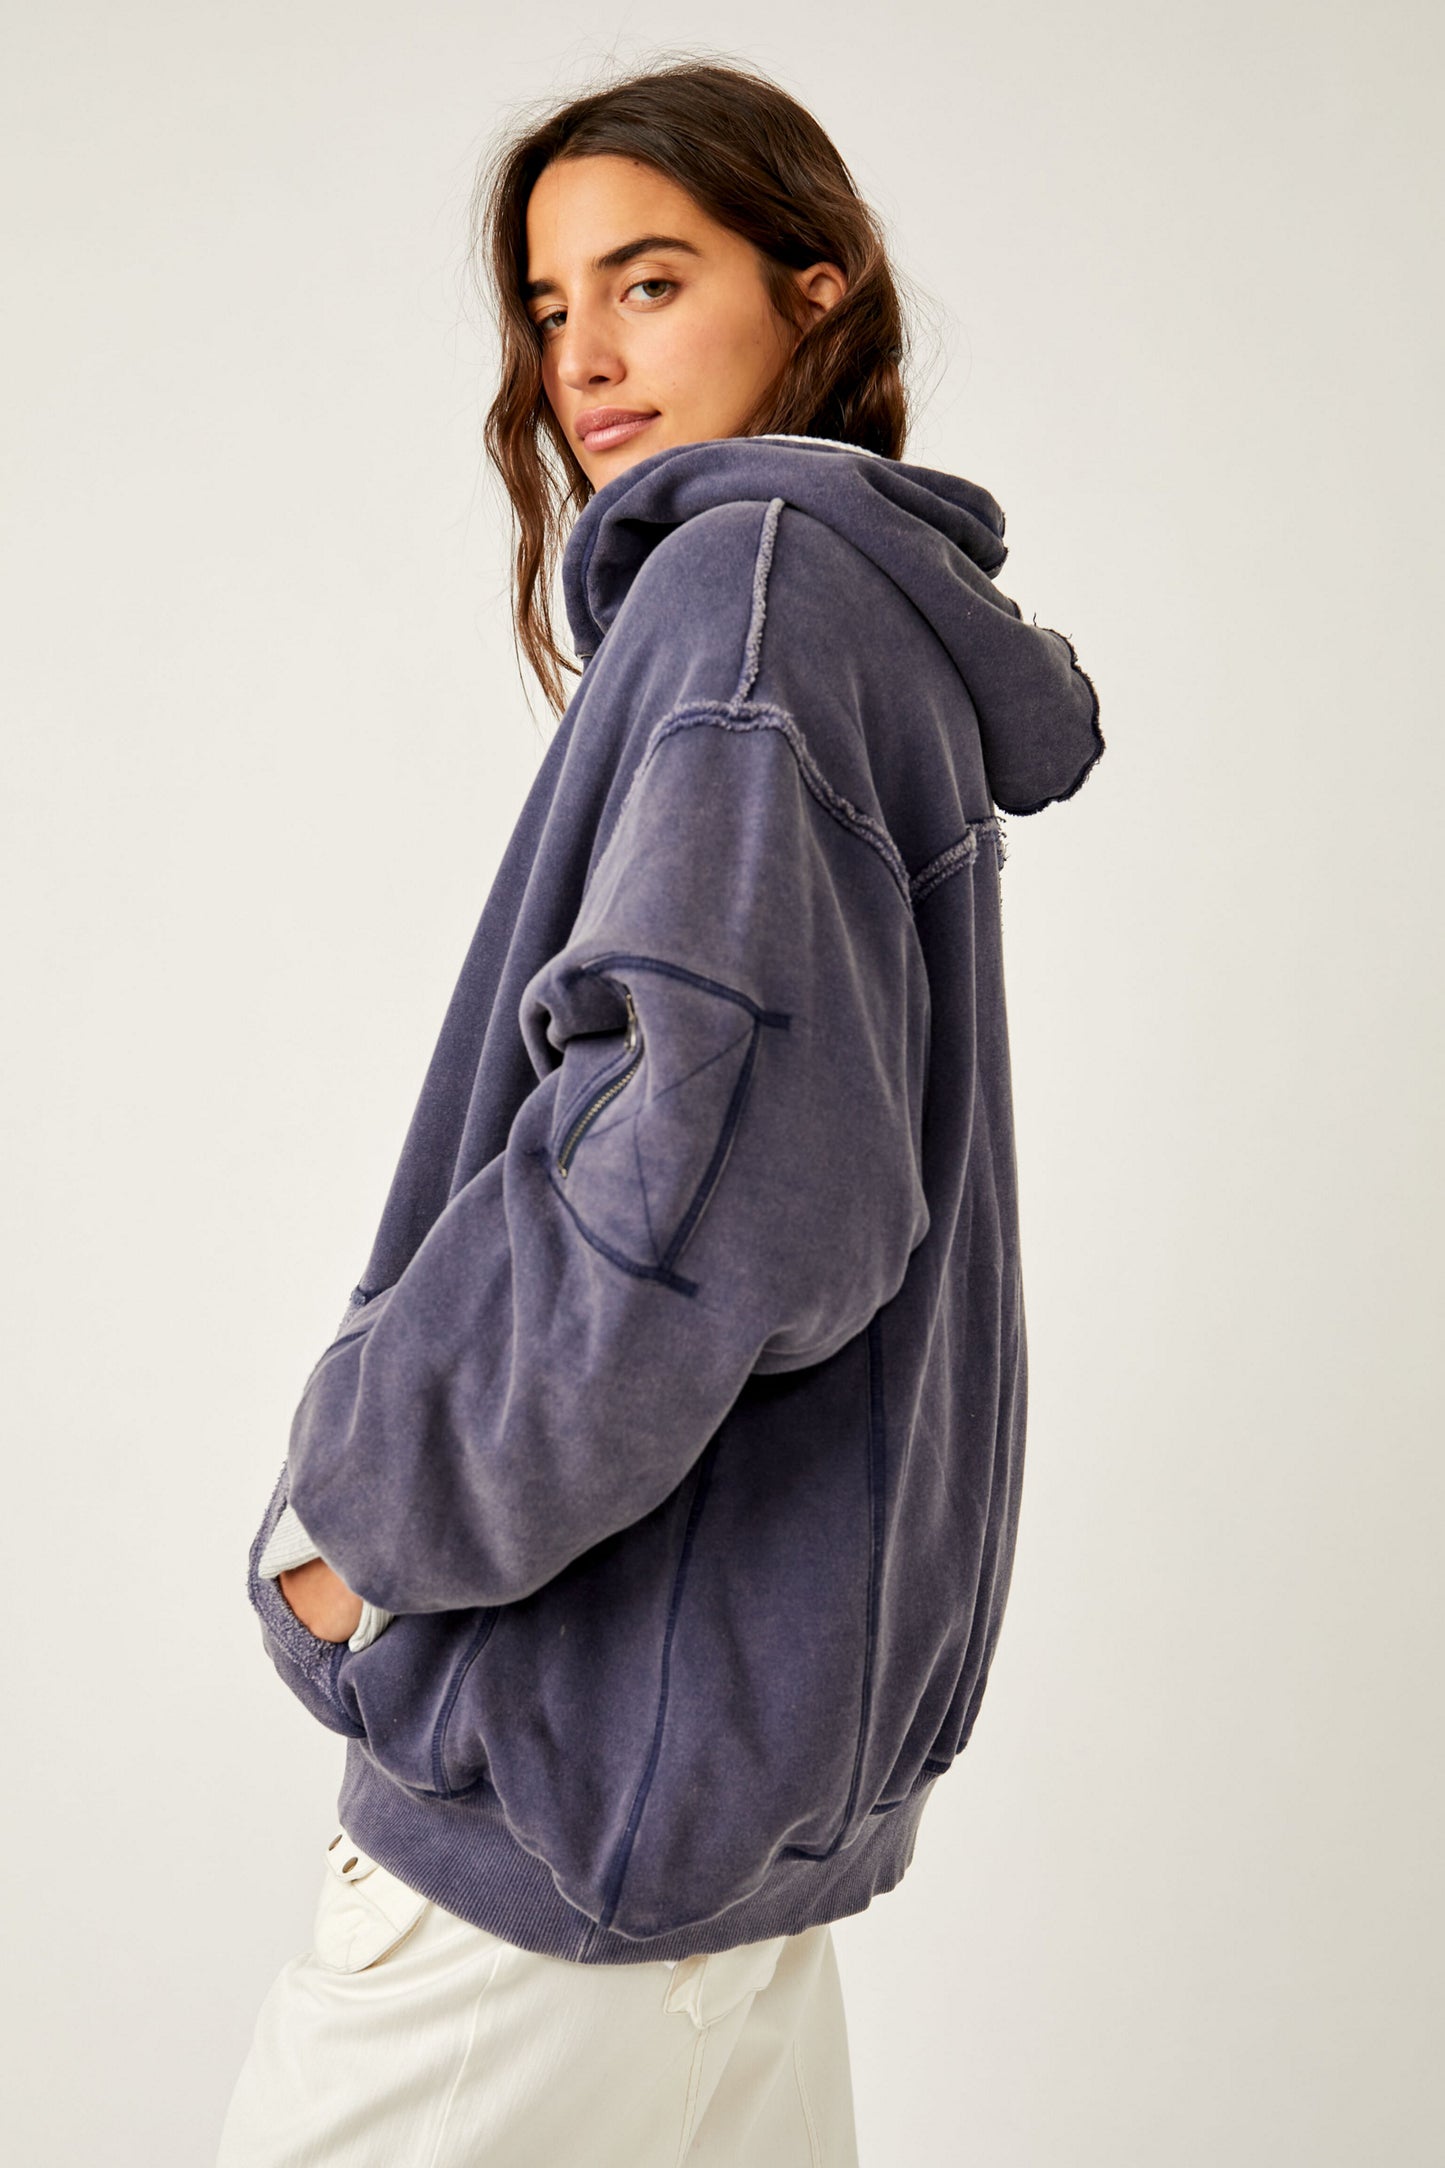 Free People: By Your Side Lined Hoodie - Starless Sky